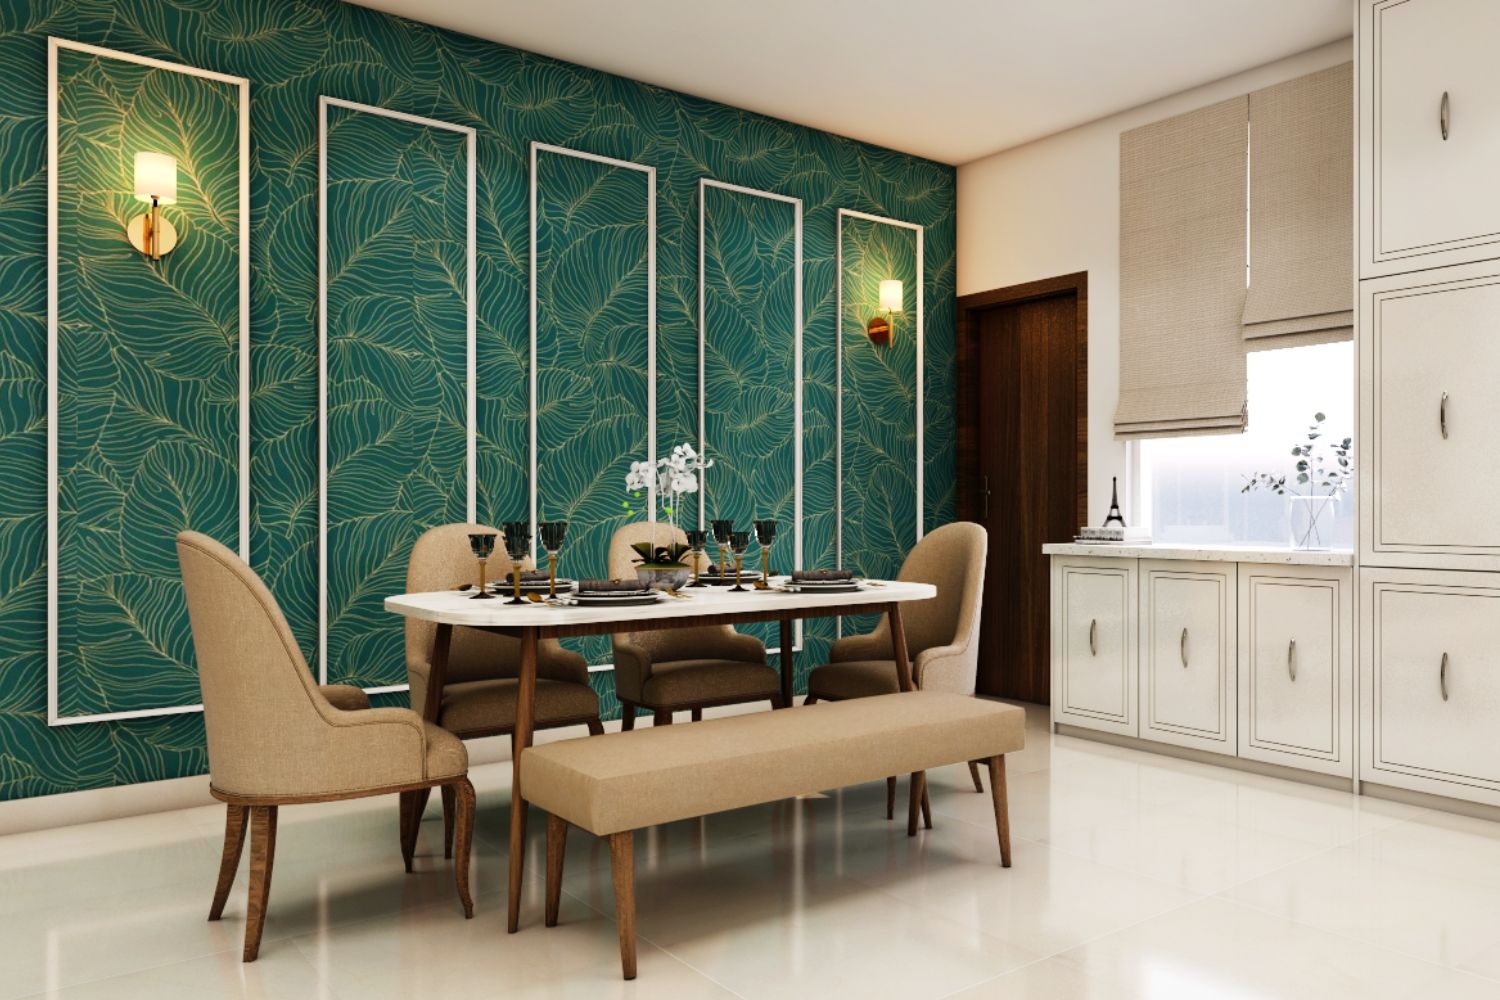 Contemporary 6-Seater Dining Room Design With Dark Green Leafy Wallpaper